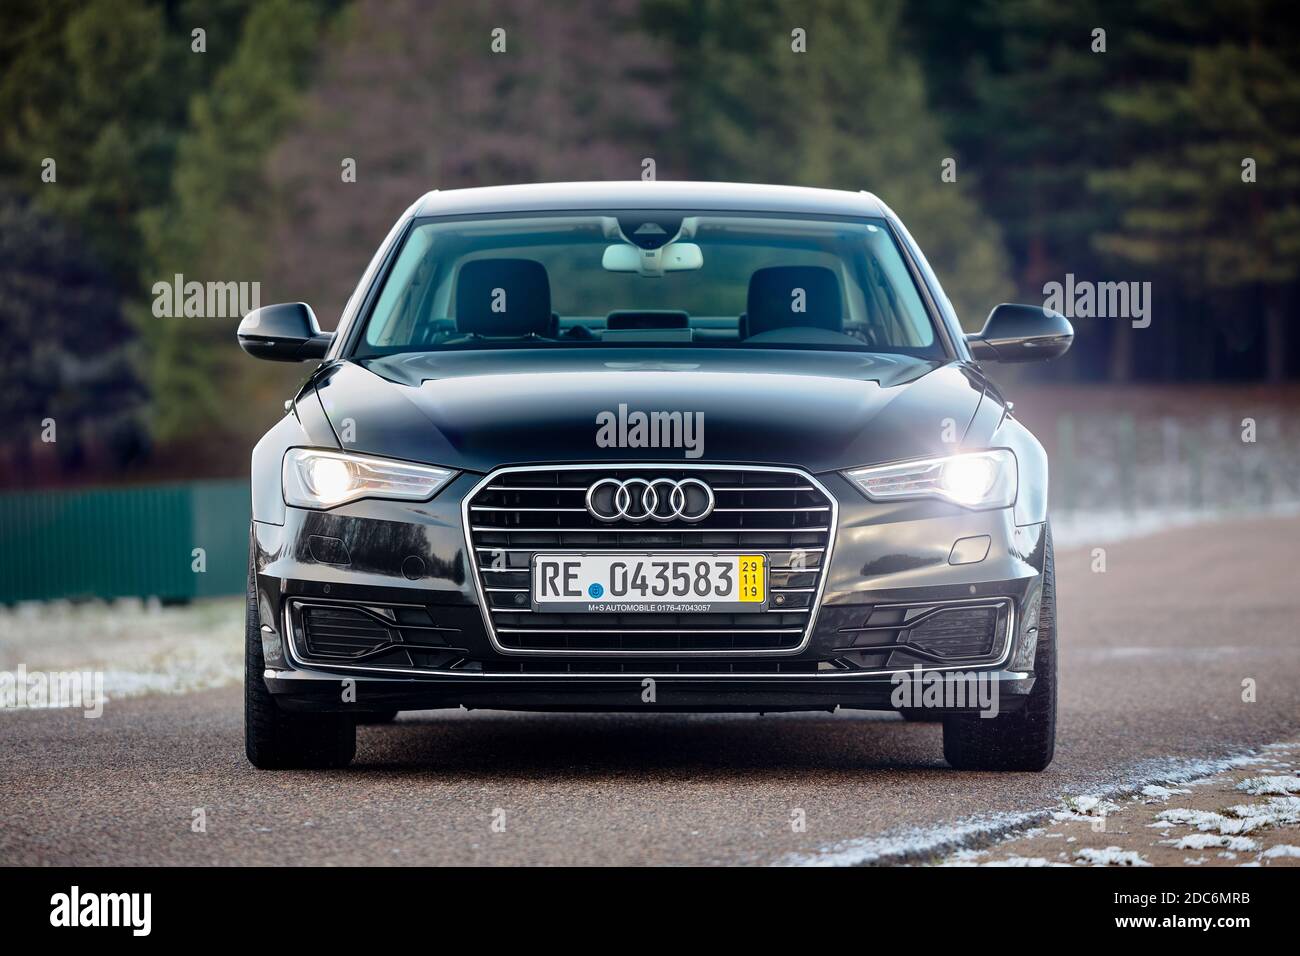 GRODNO, BELARUS - DECEMBER 2019: Audi A6 4G, C7 2.0 TDI 190 Hp 2016 black  metallic front view outdoors on winter empty road with forest on background  Stock Photo - Alamy